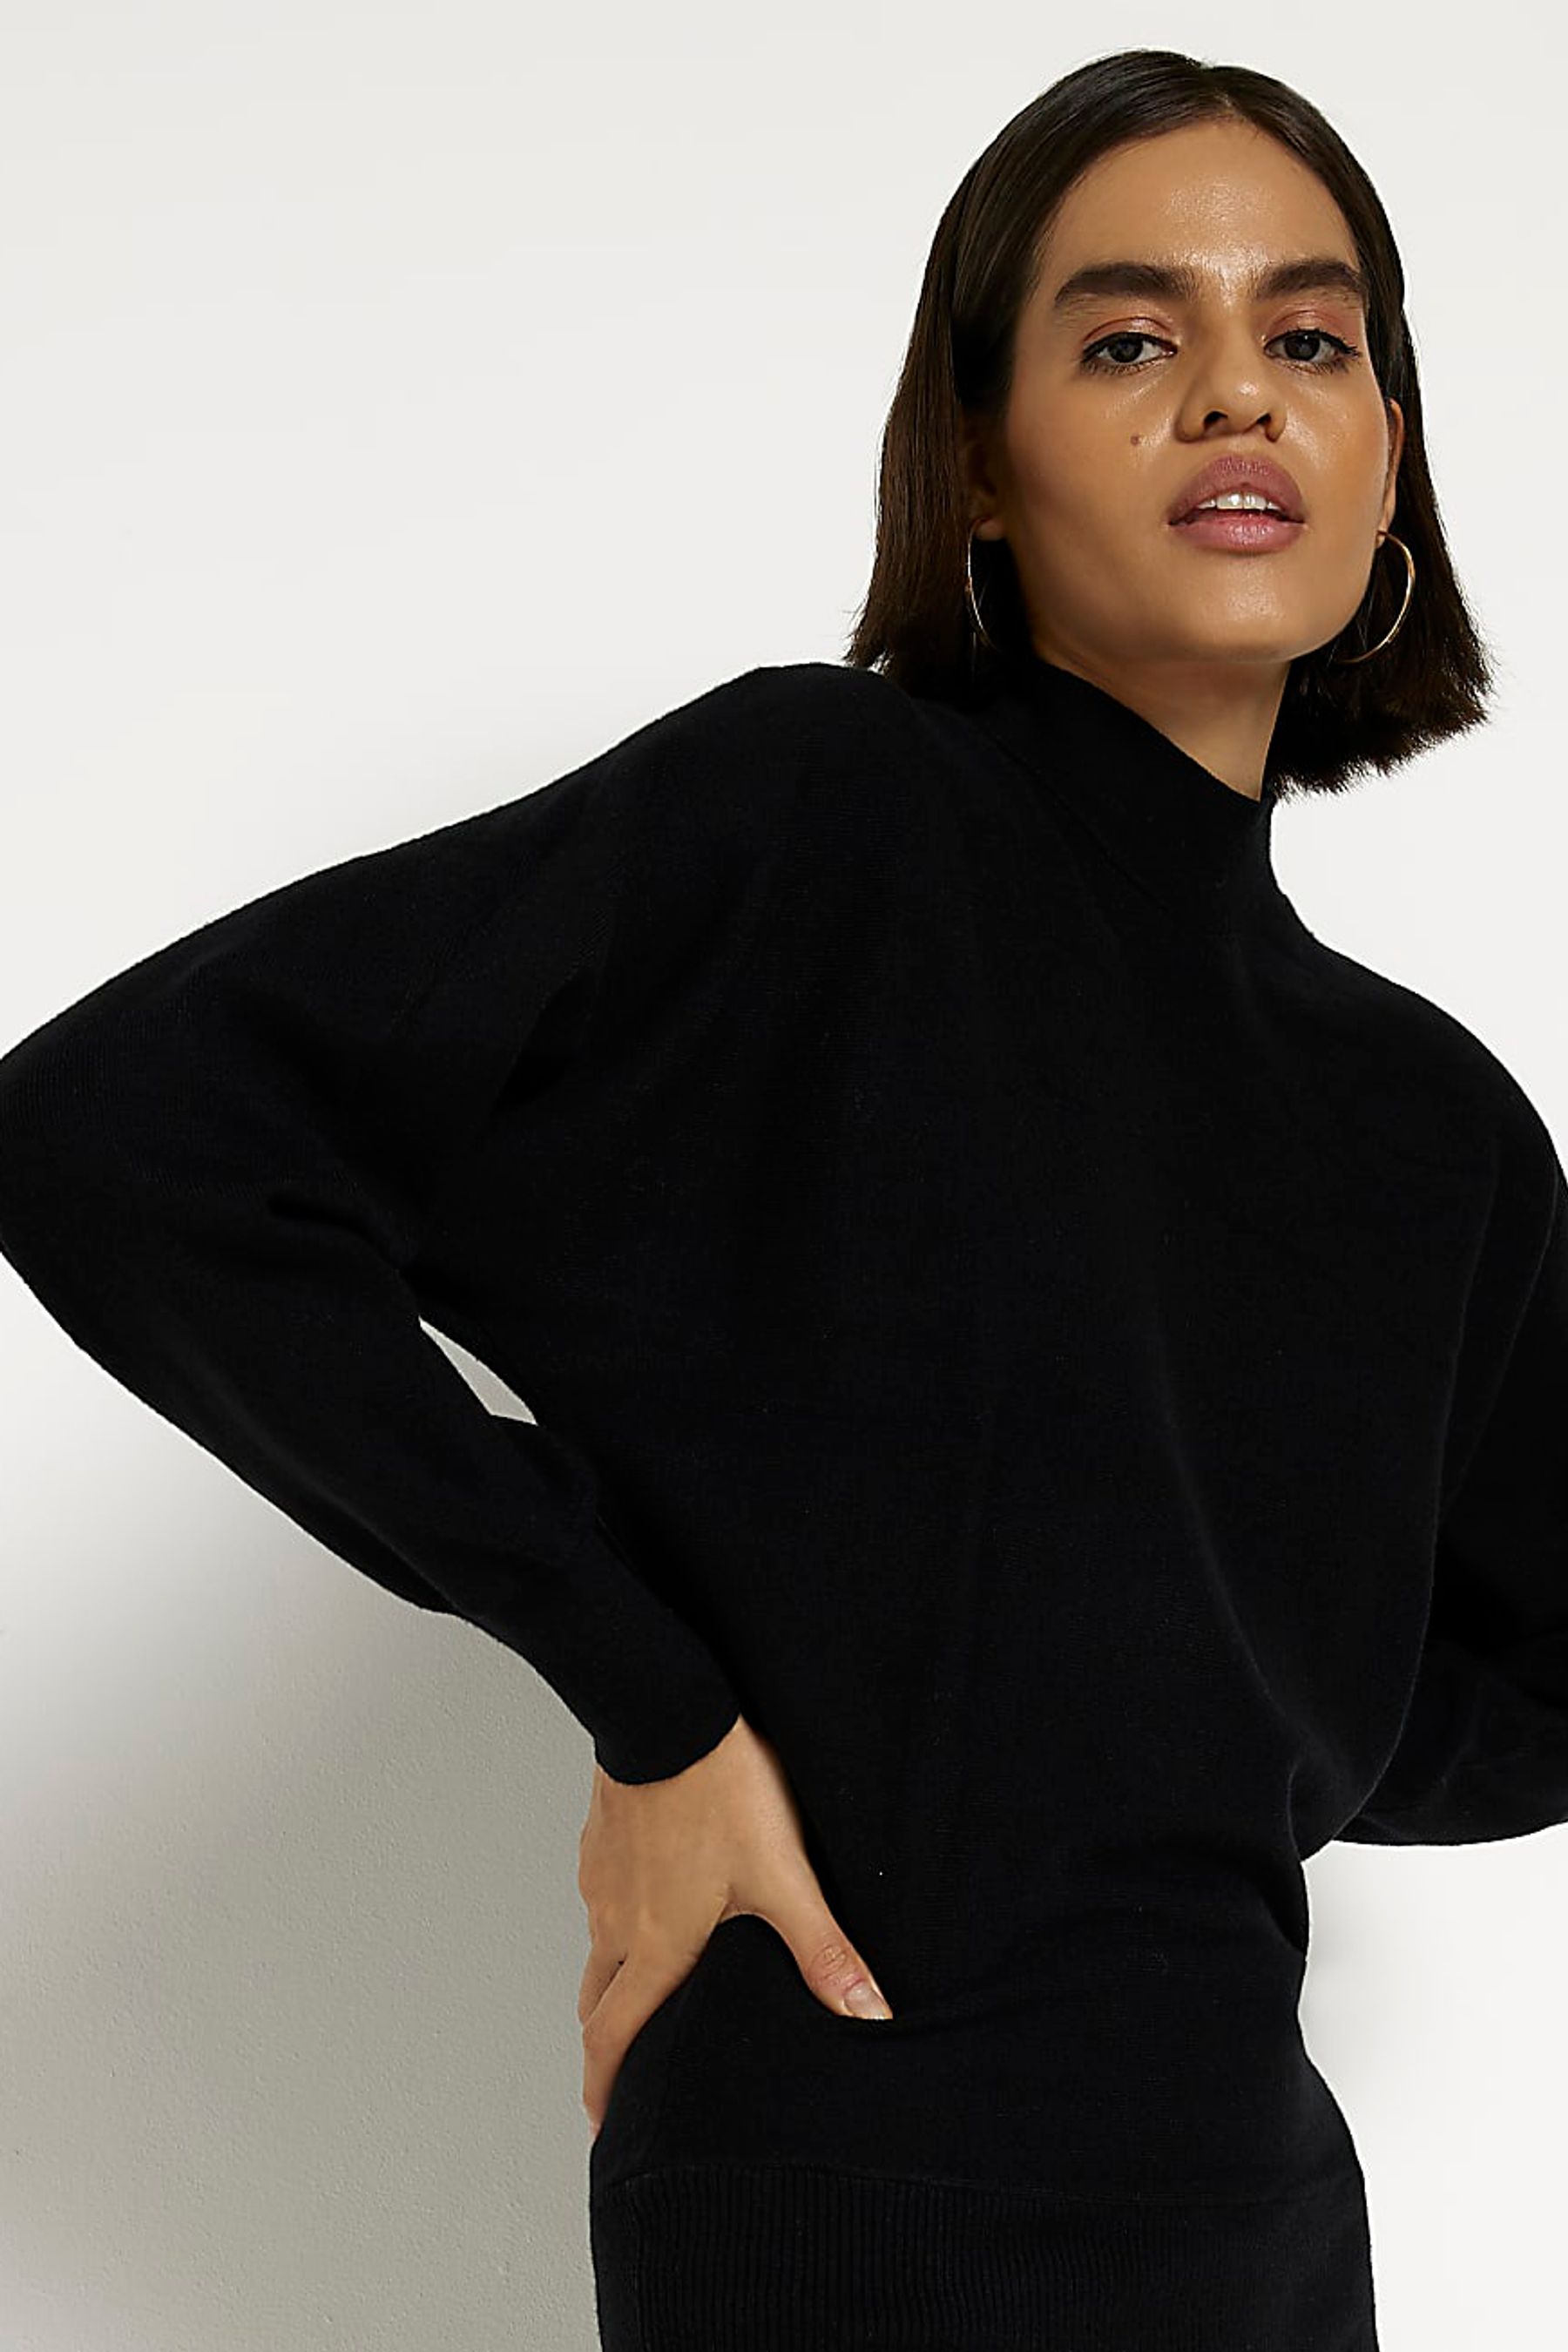 Buy River Island Black Batwing Knit Mini Dress from the Next UK online shop